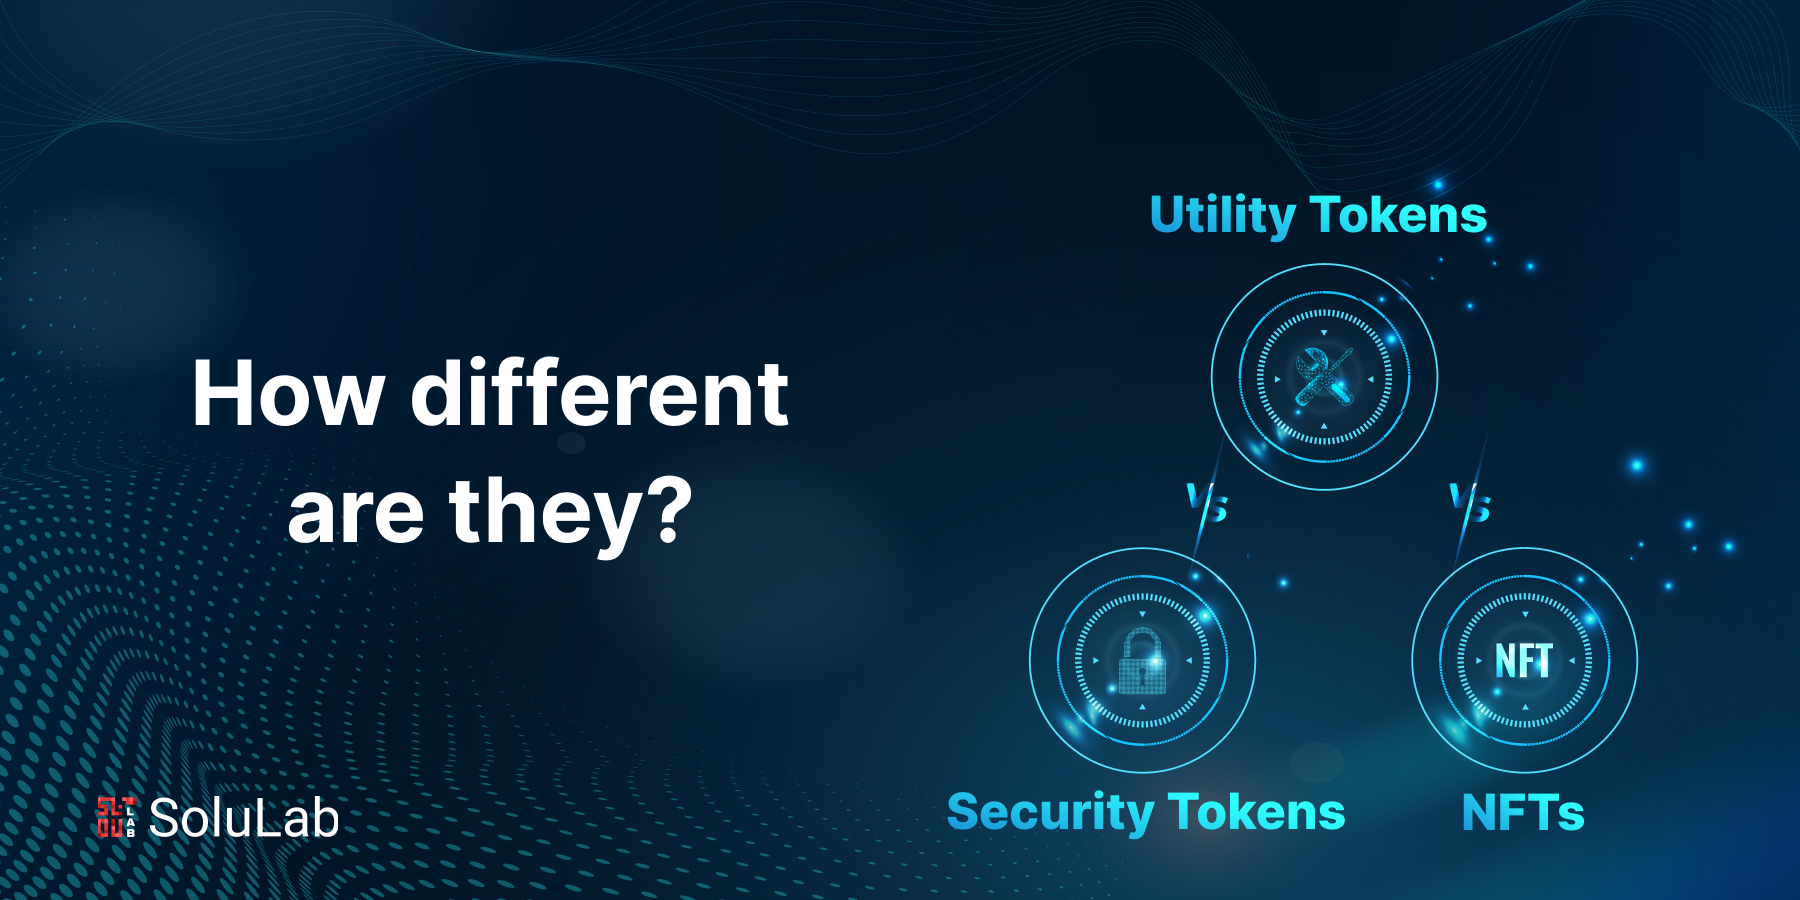 Security Tokens vs Utility Tokens vs NFTs - How different are they?